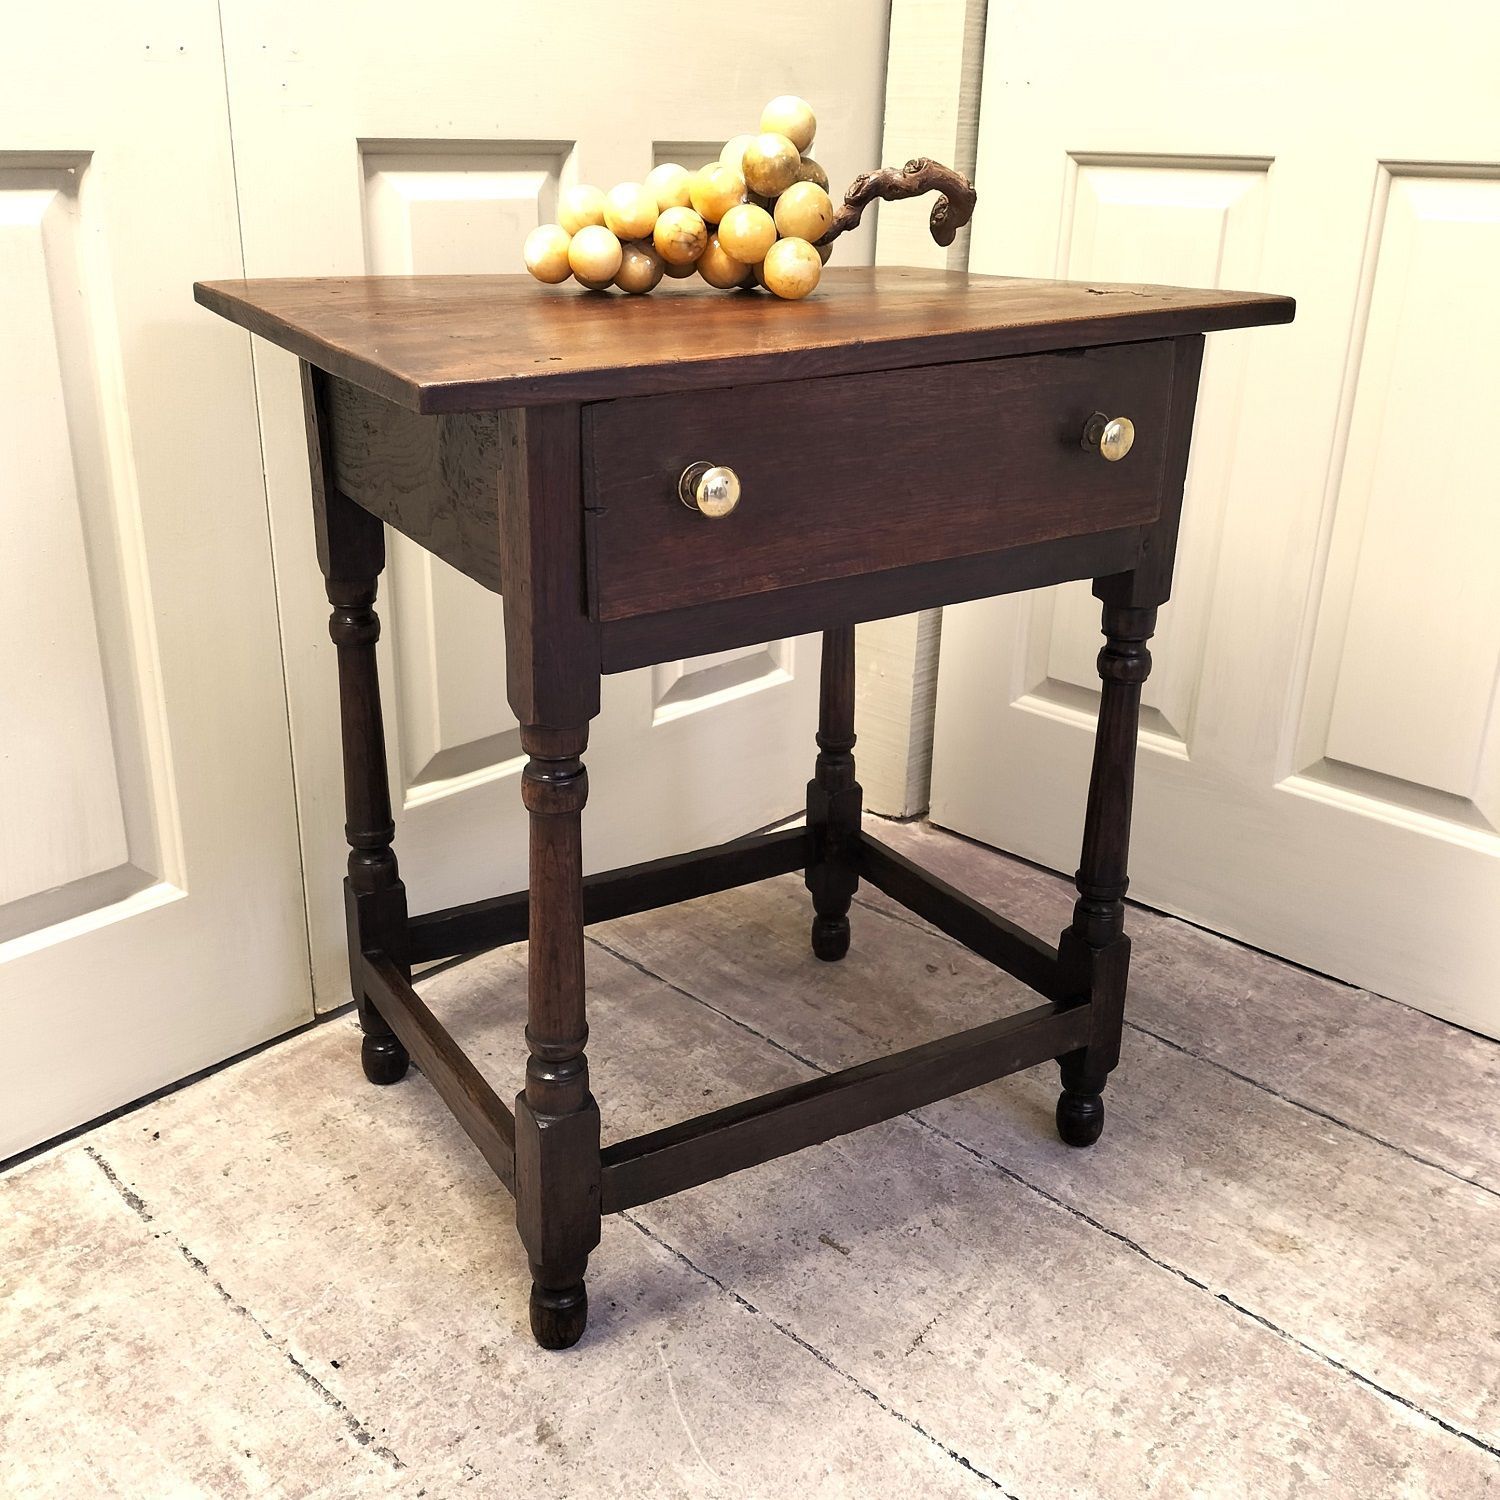 small oak and elm side table The ANTIQUES SOURCE BA14 6HH 